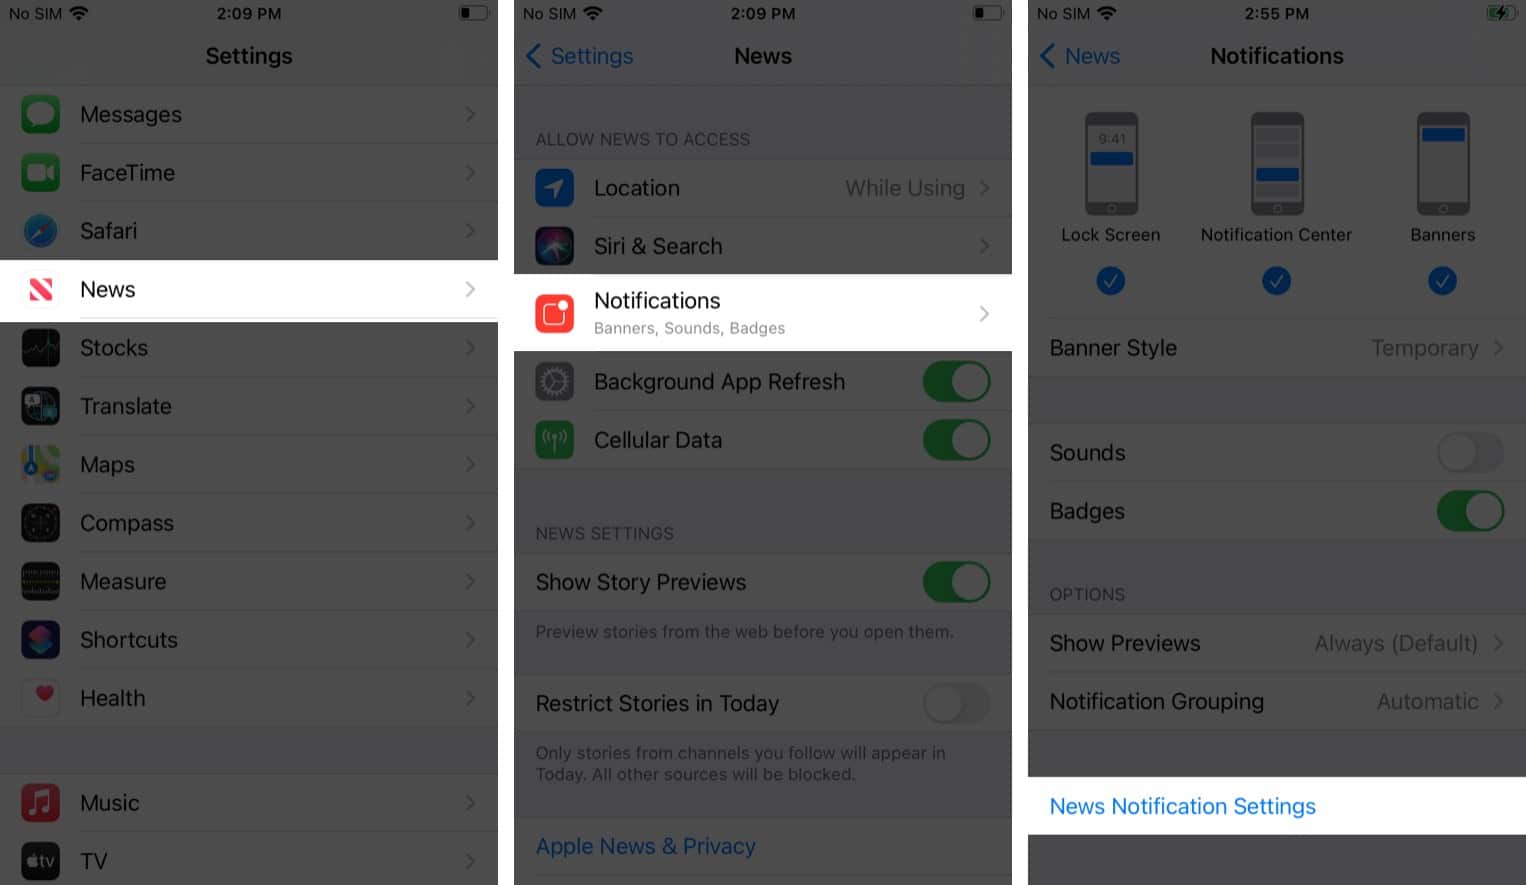 Turn of off Apple News Notifications from iPhone Settings